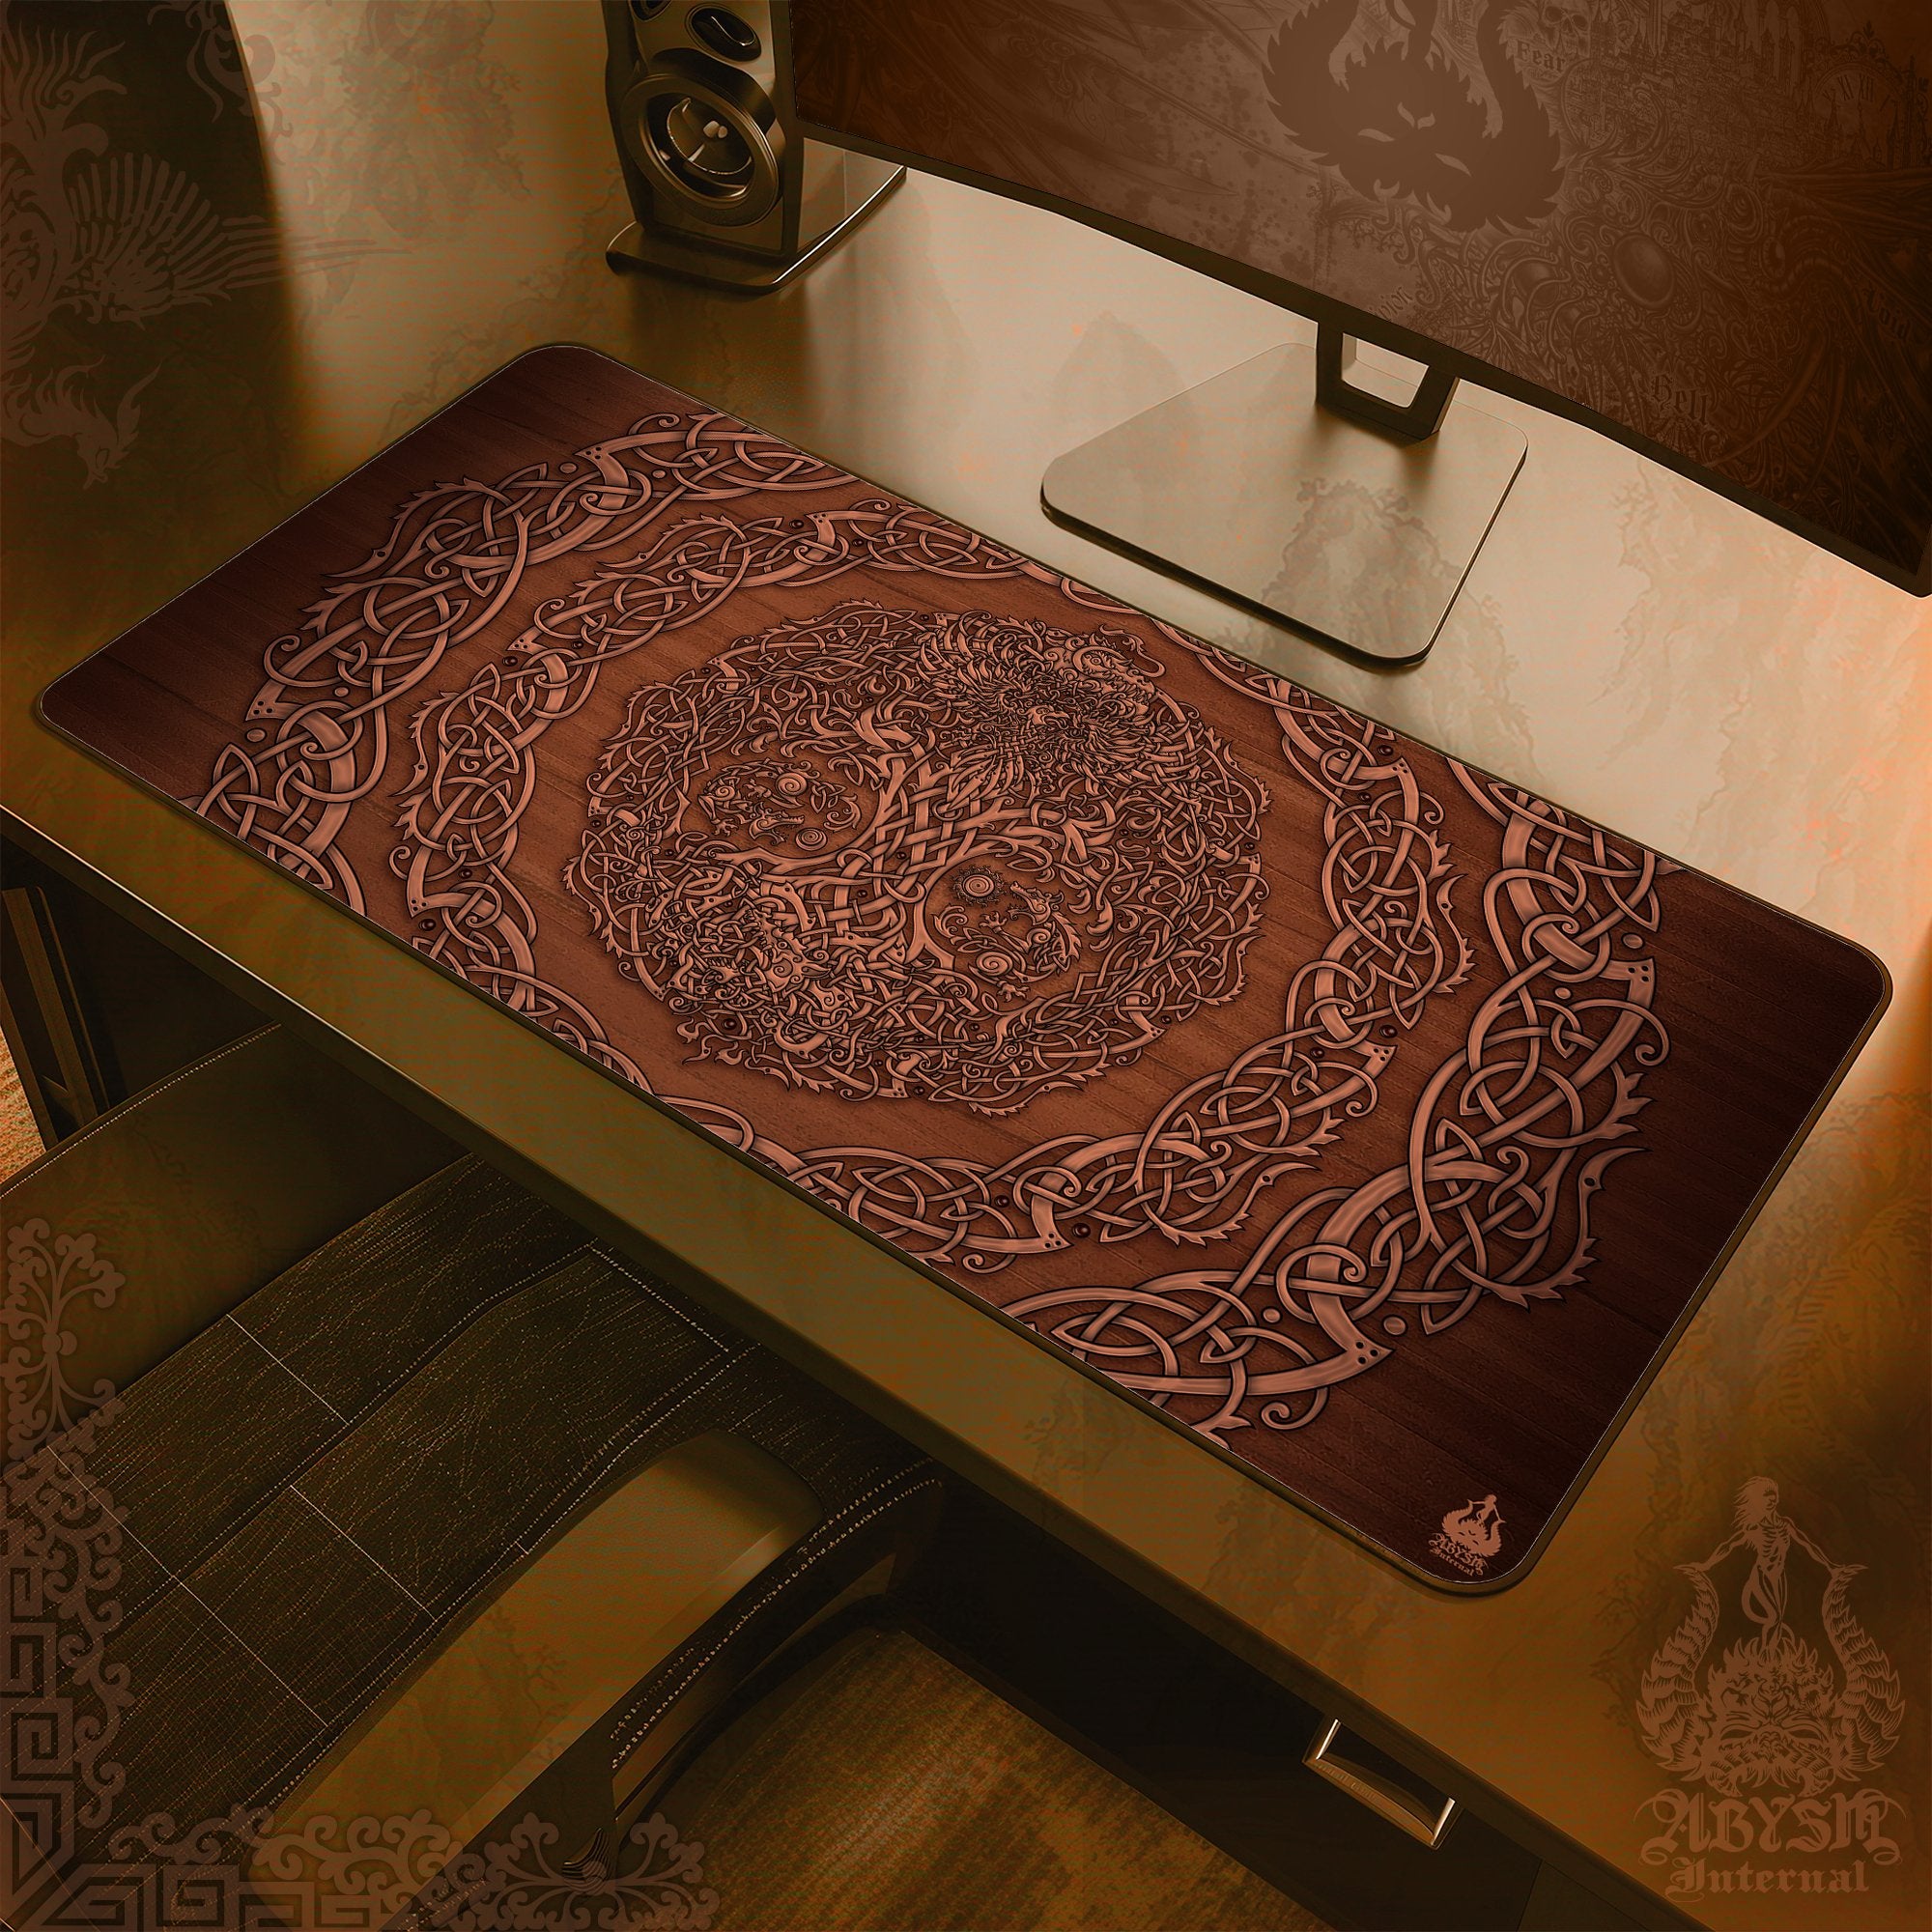 Tree of Life Workpad, Celtic Knotwork Desk Mat, Wicca Gaming Mouse Pad, Boho Table Protector Cover, Art Print - Wood - Abysm Internal